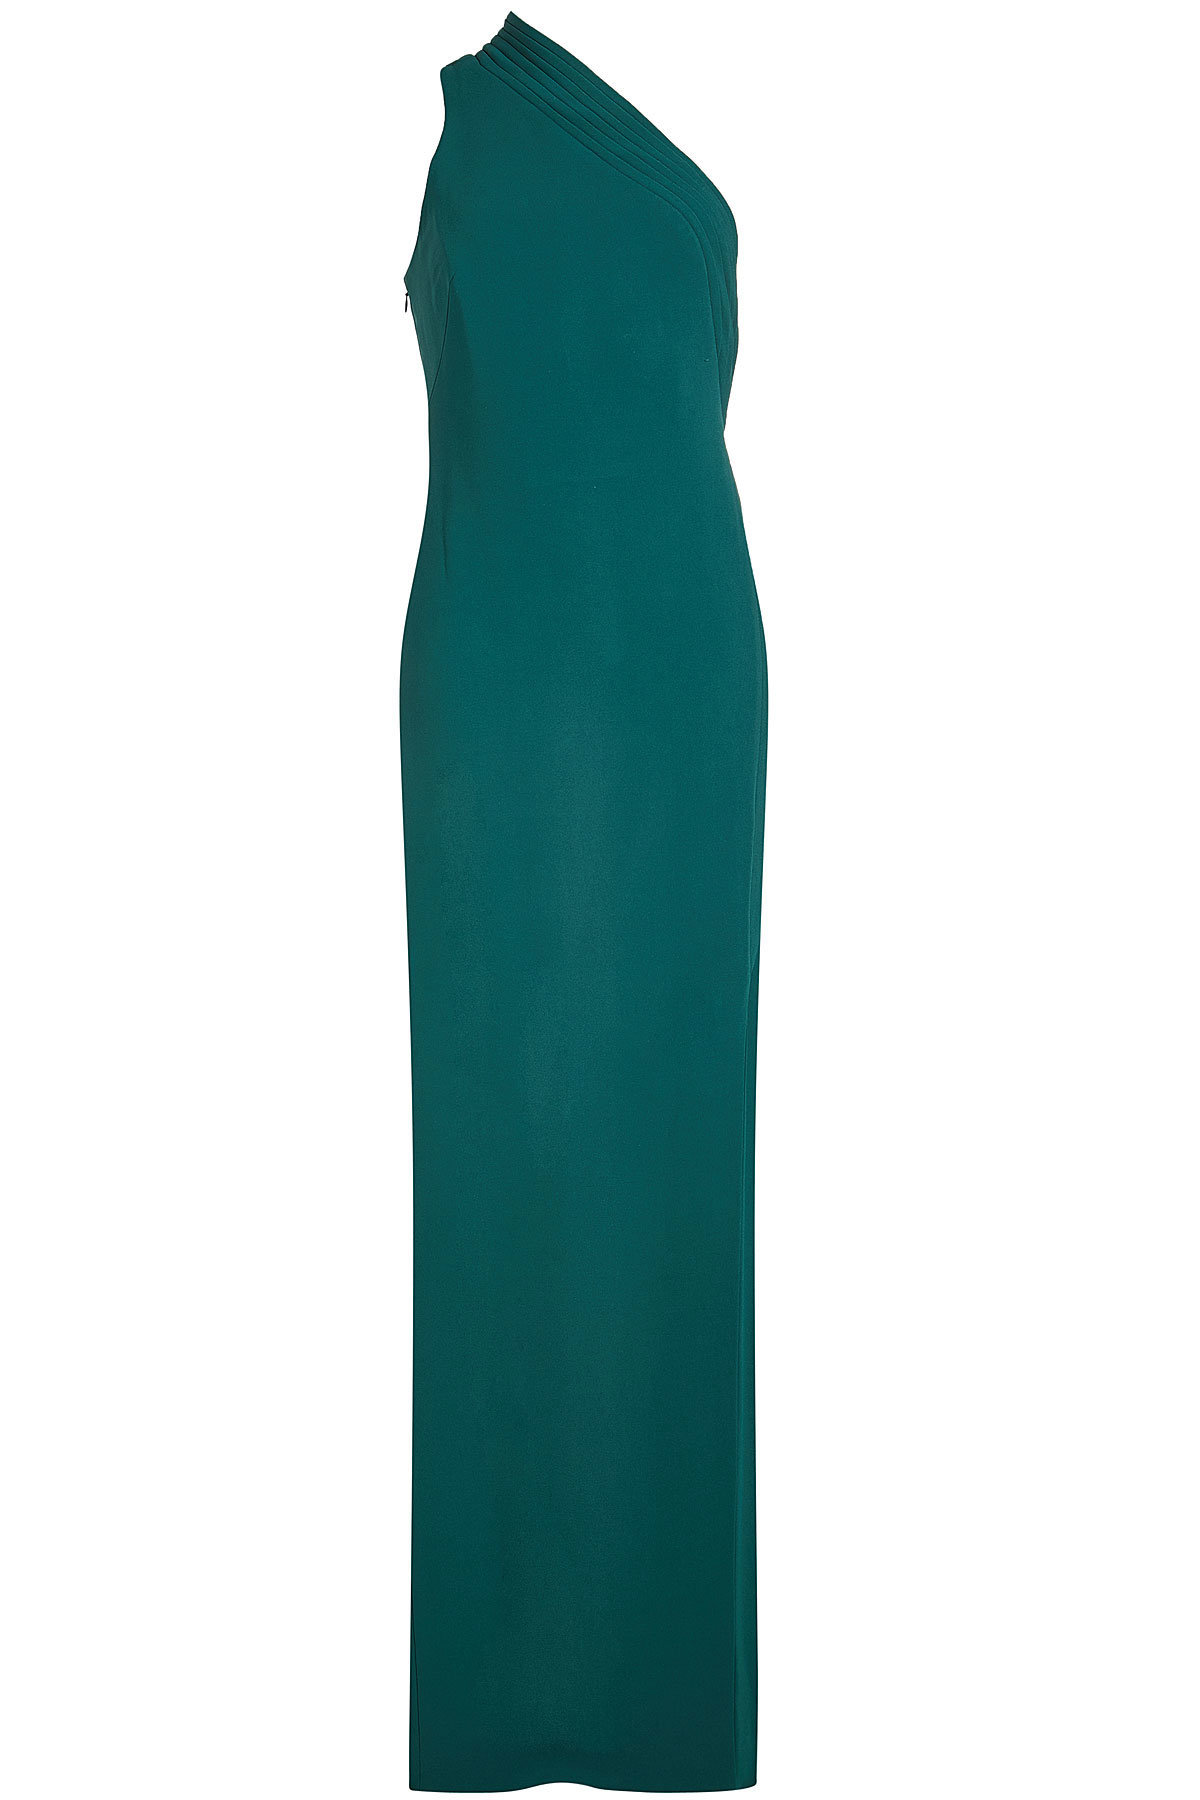 Brandon Maxwell - One-Shoulder Gown with Slit